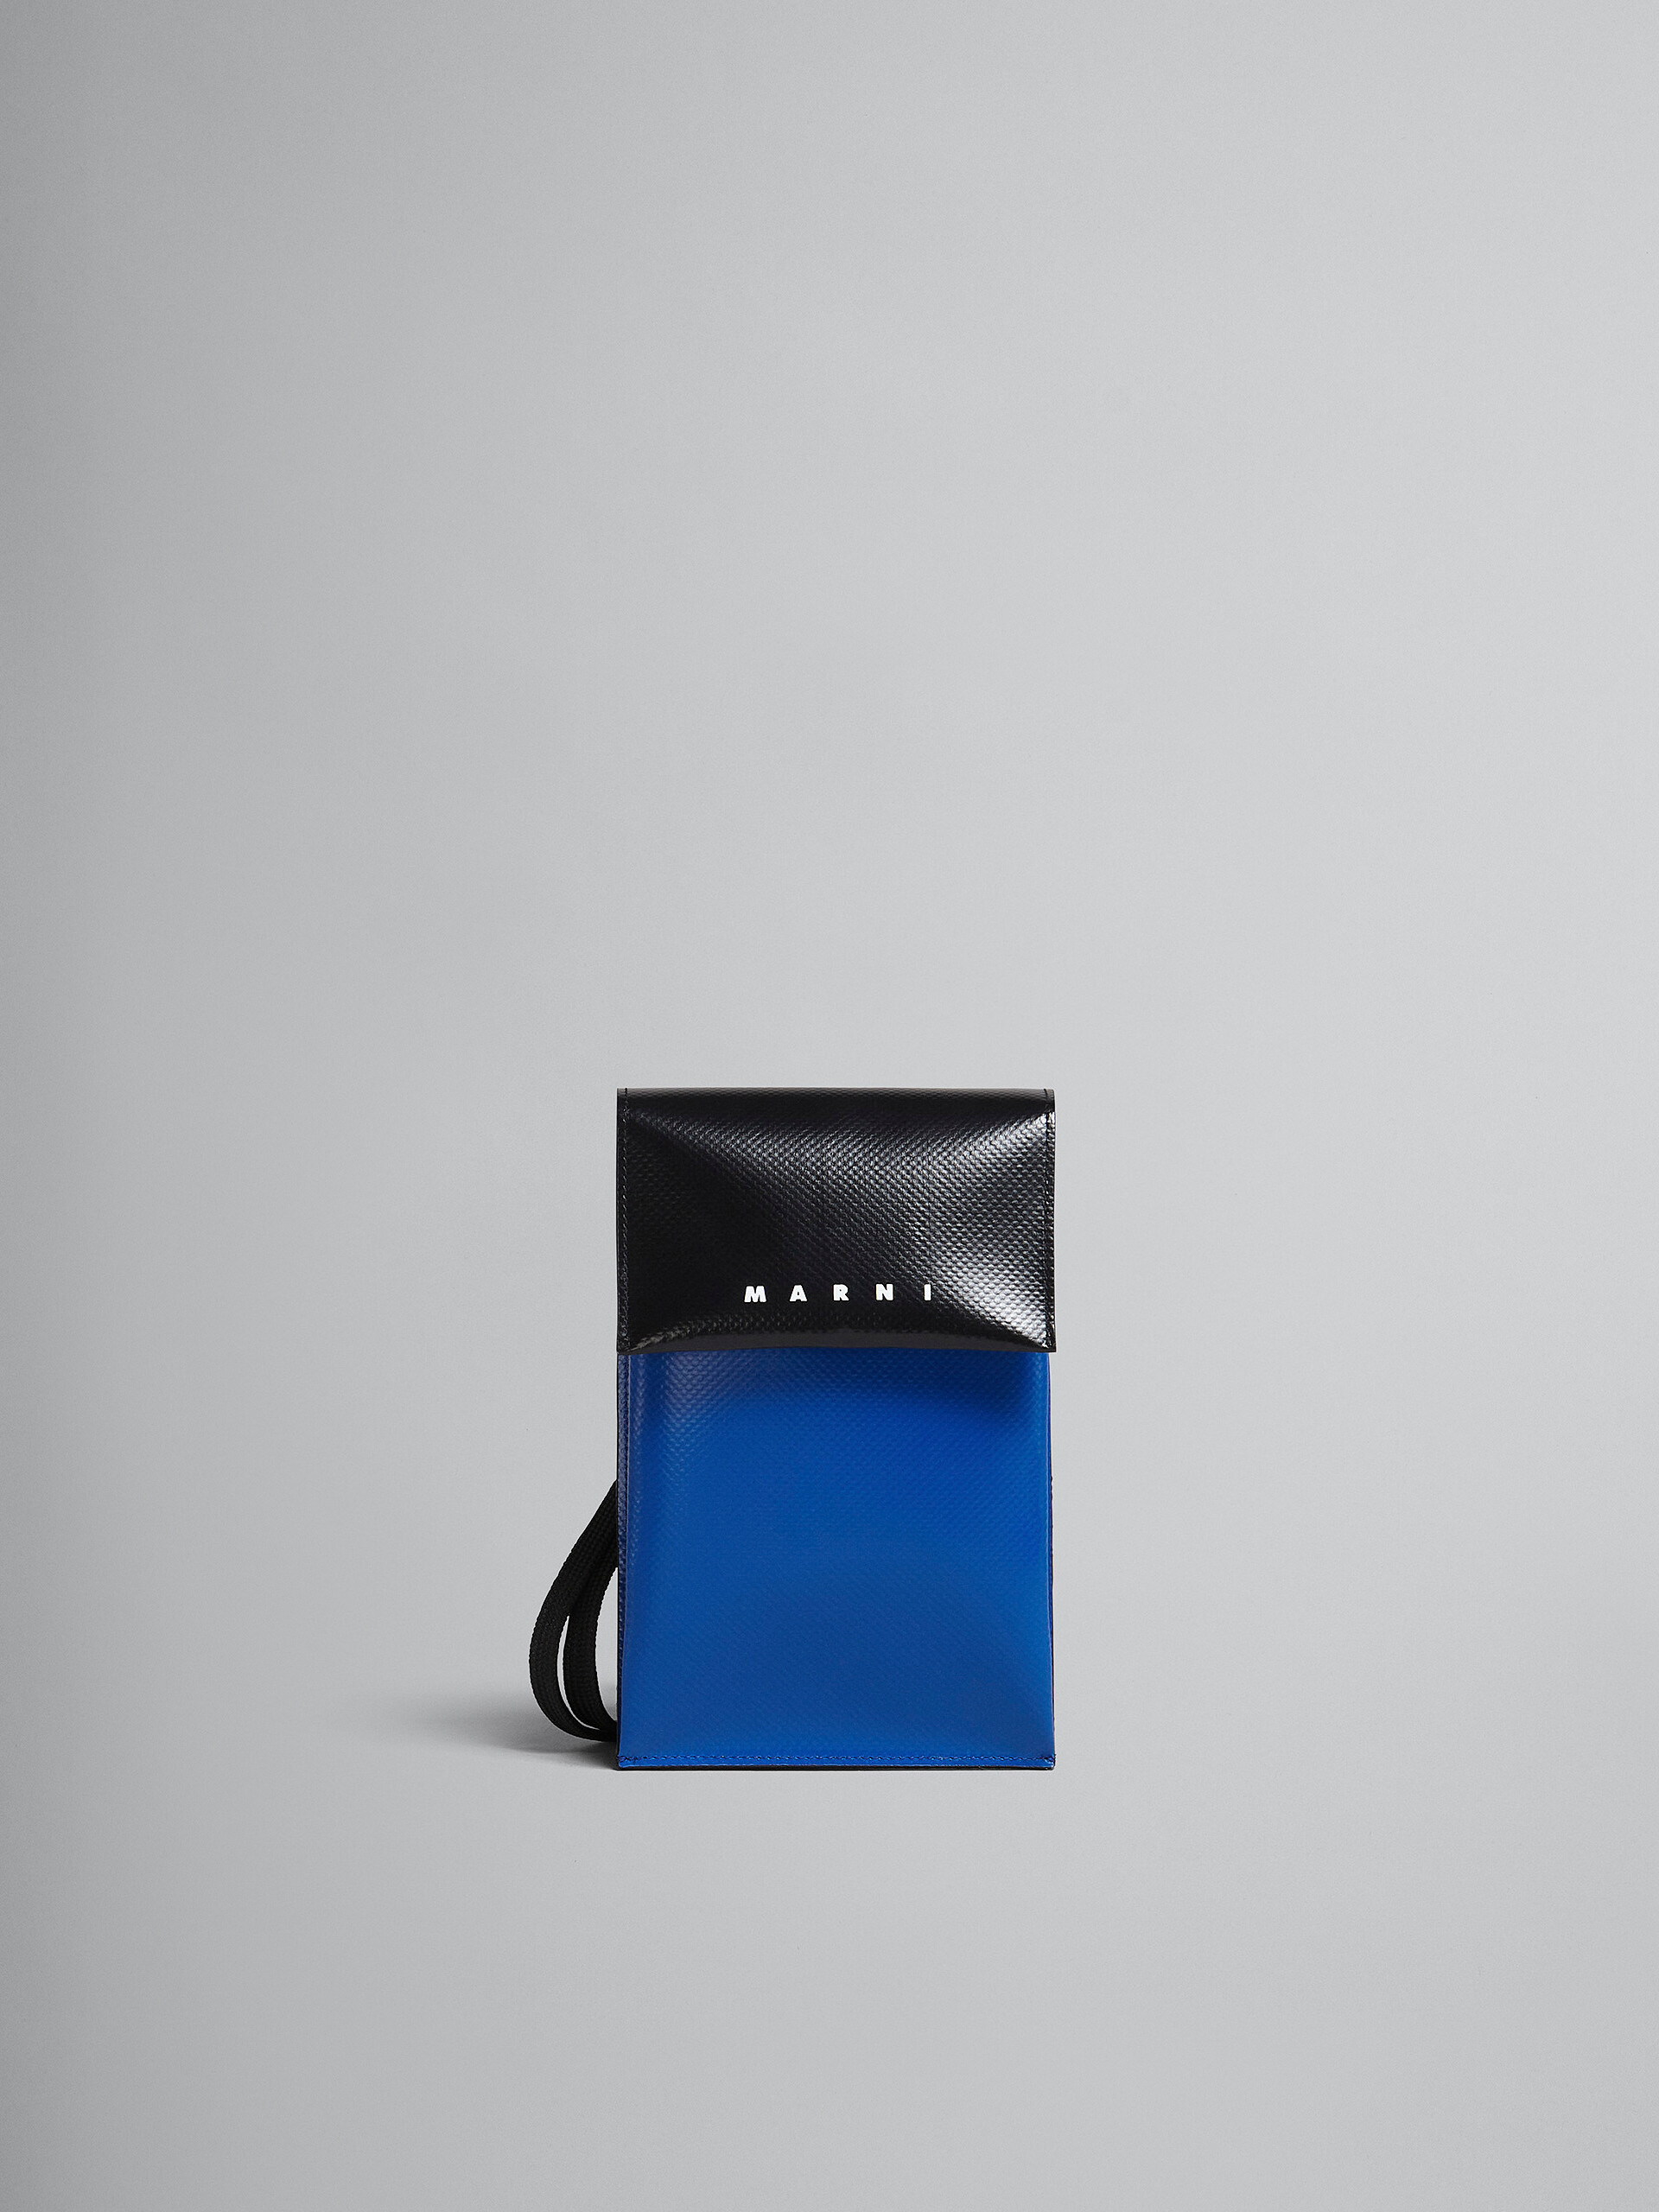 Tribeca blue and black phone case - Wallets and Small Leather Goods - Image 1